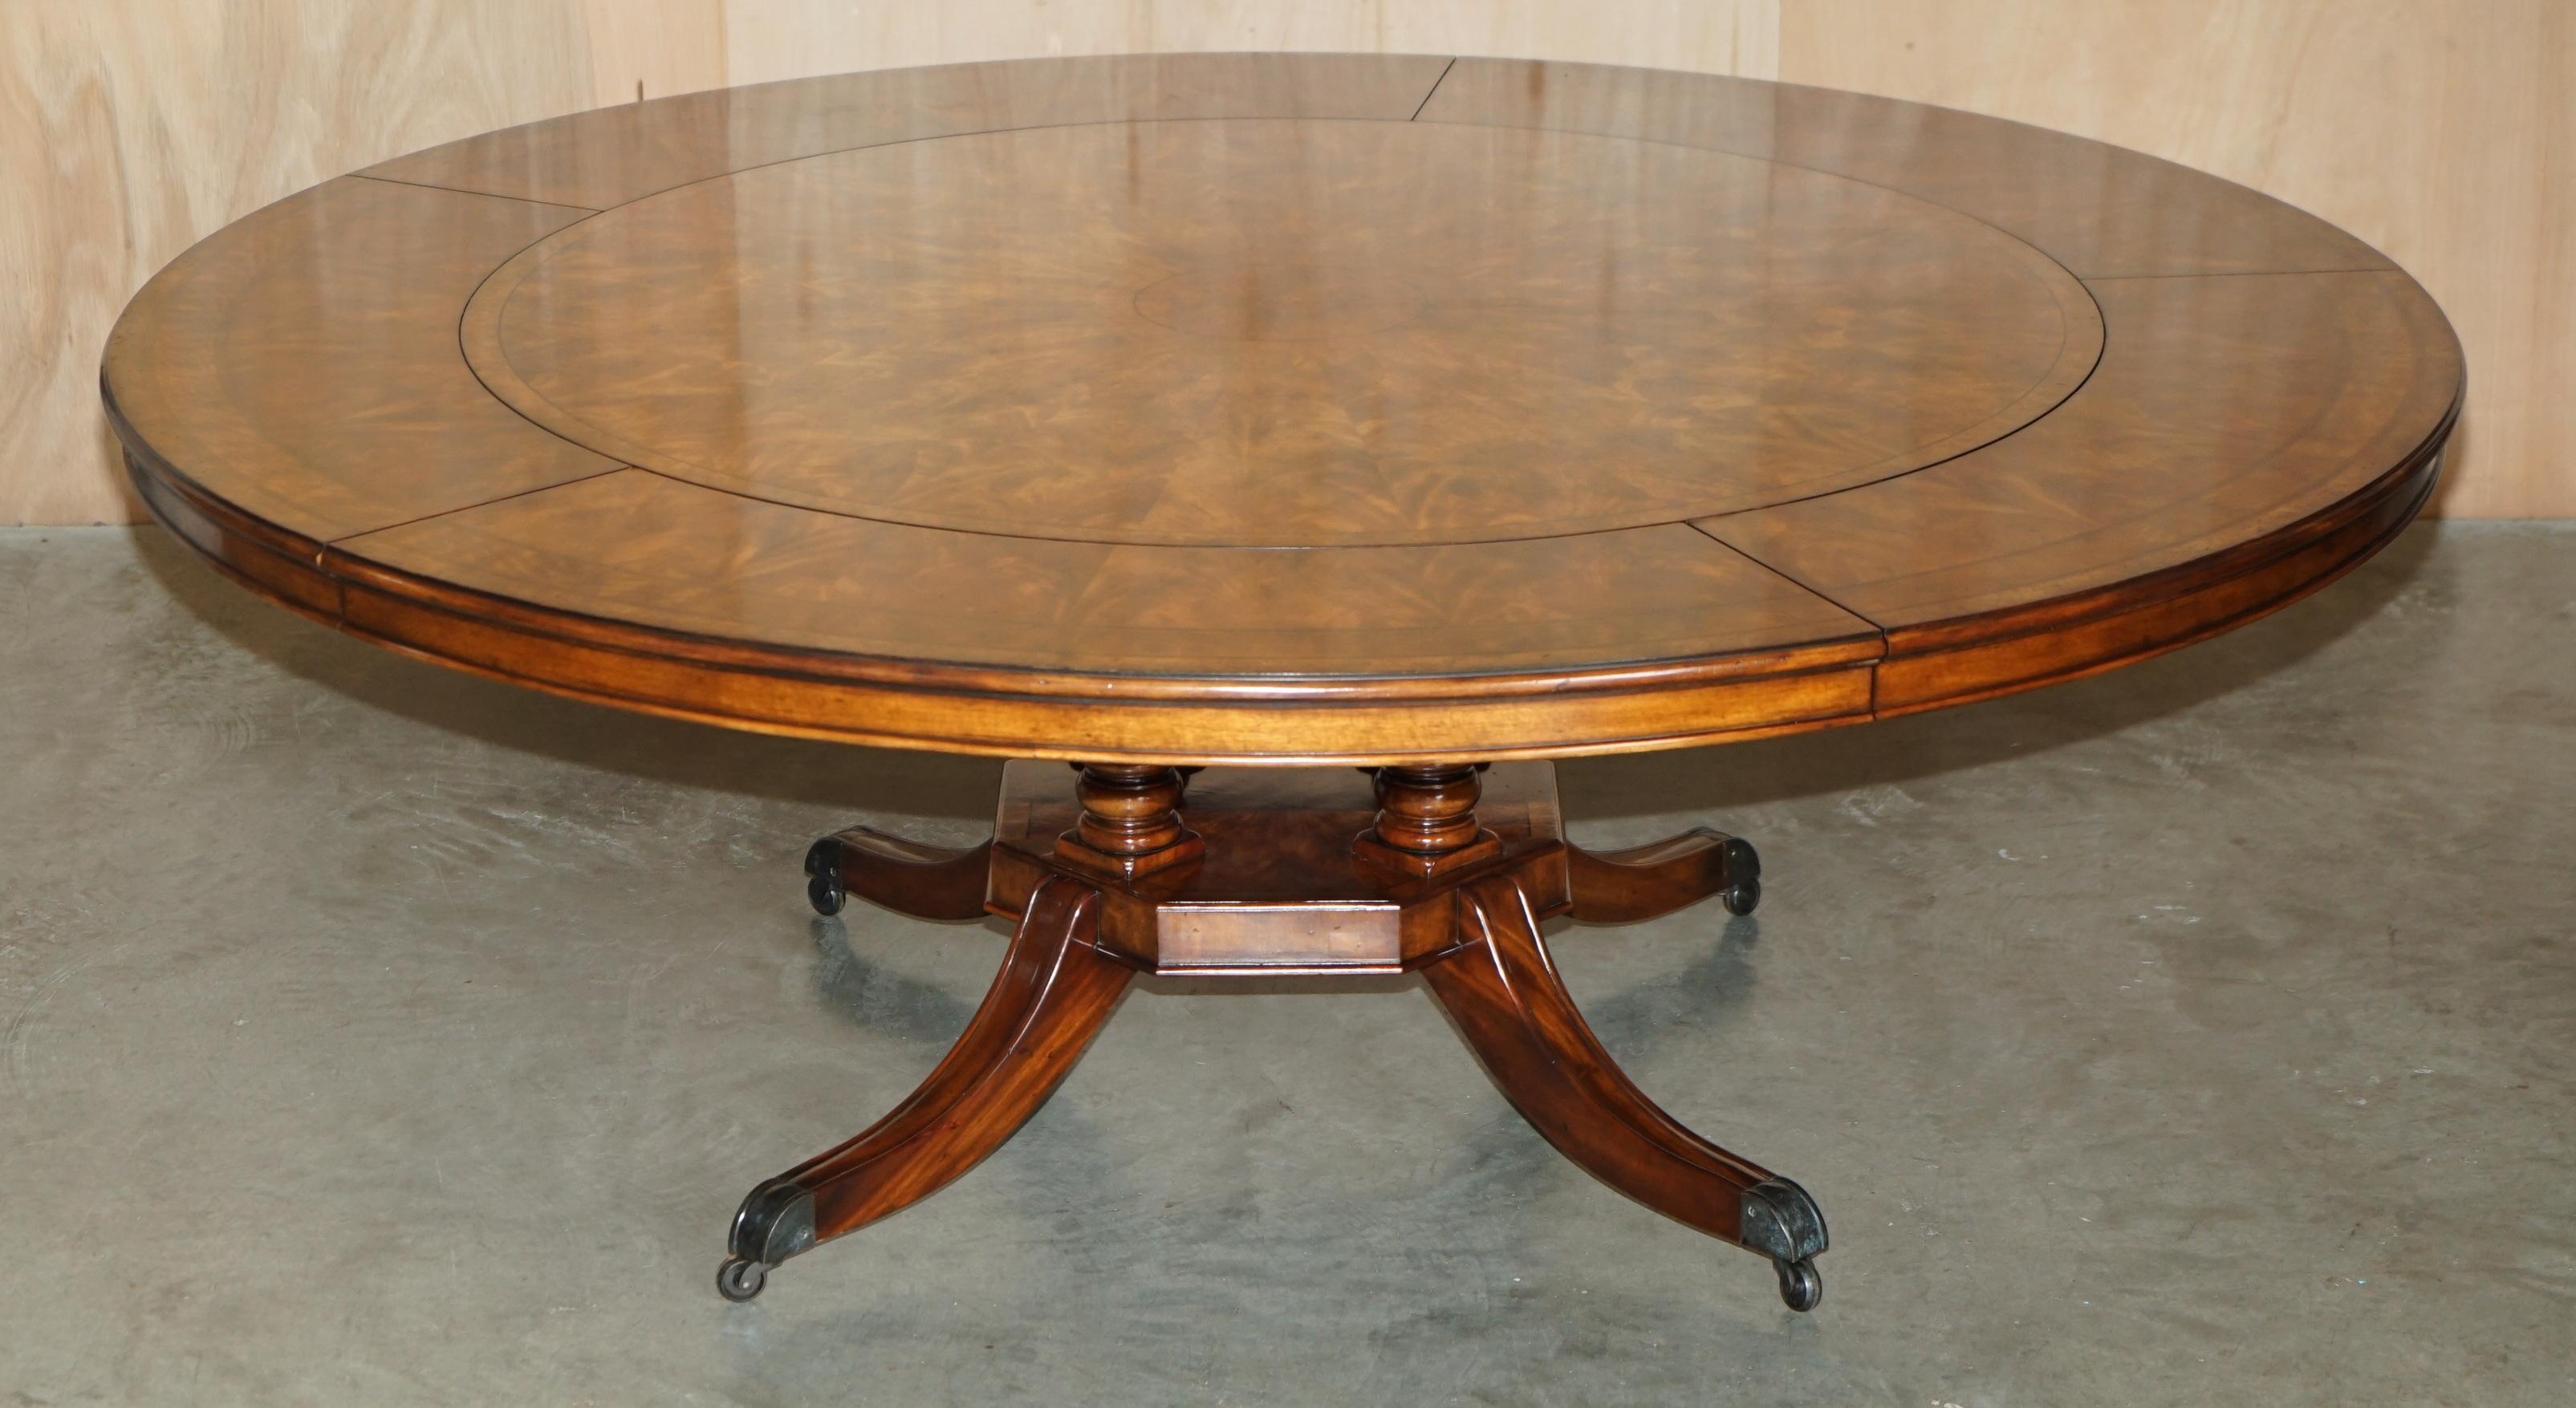  DESIGNER THEODORE ALEXANDER WALNUT EXTENDING ROUND JUPE DiNING TABLE For Sale 6